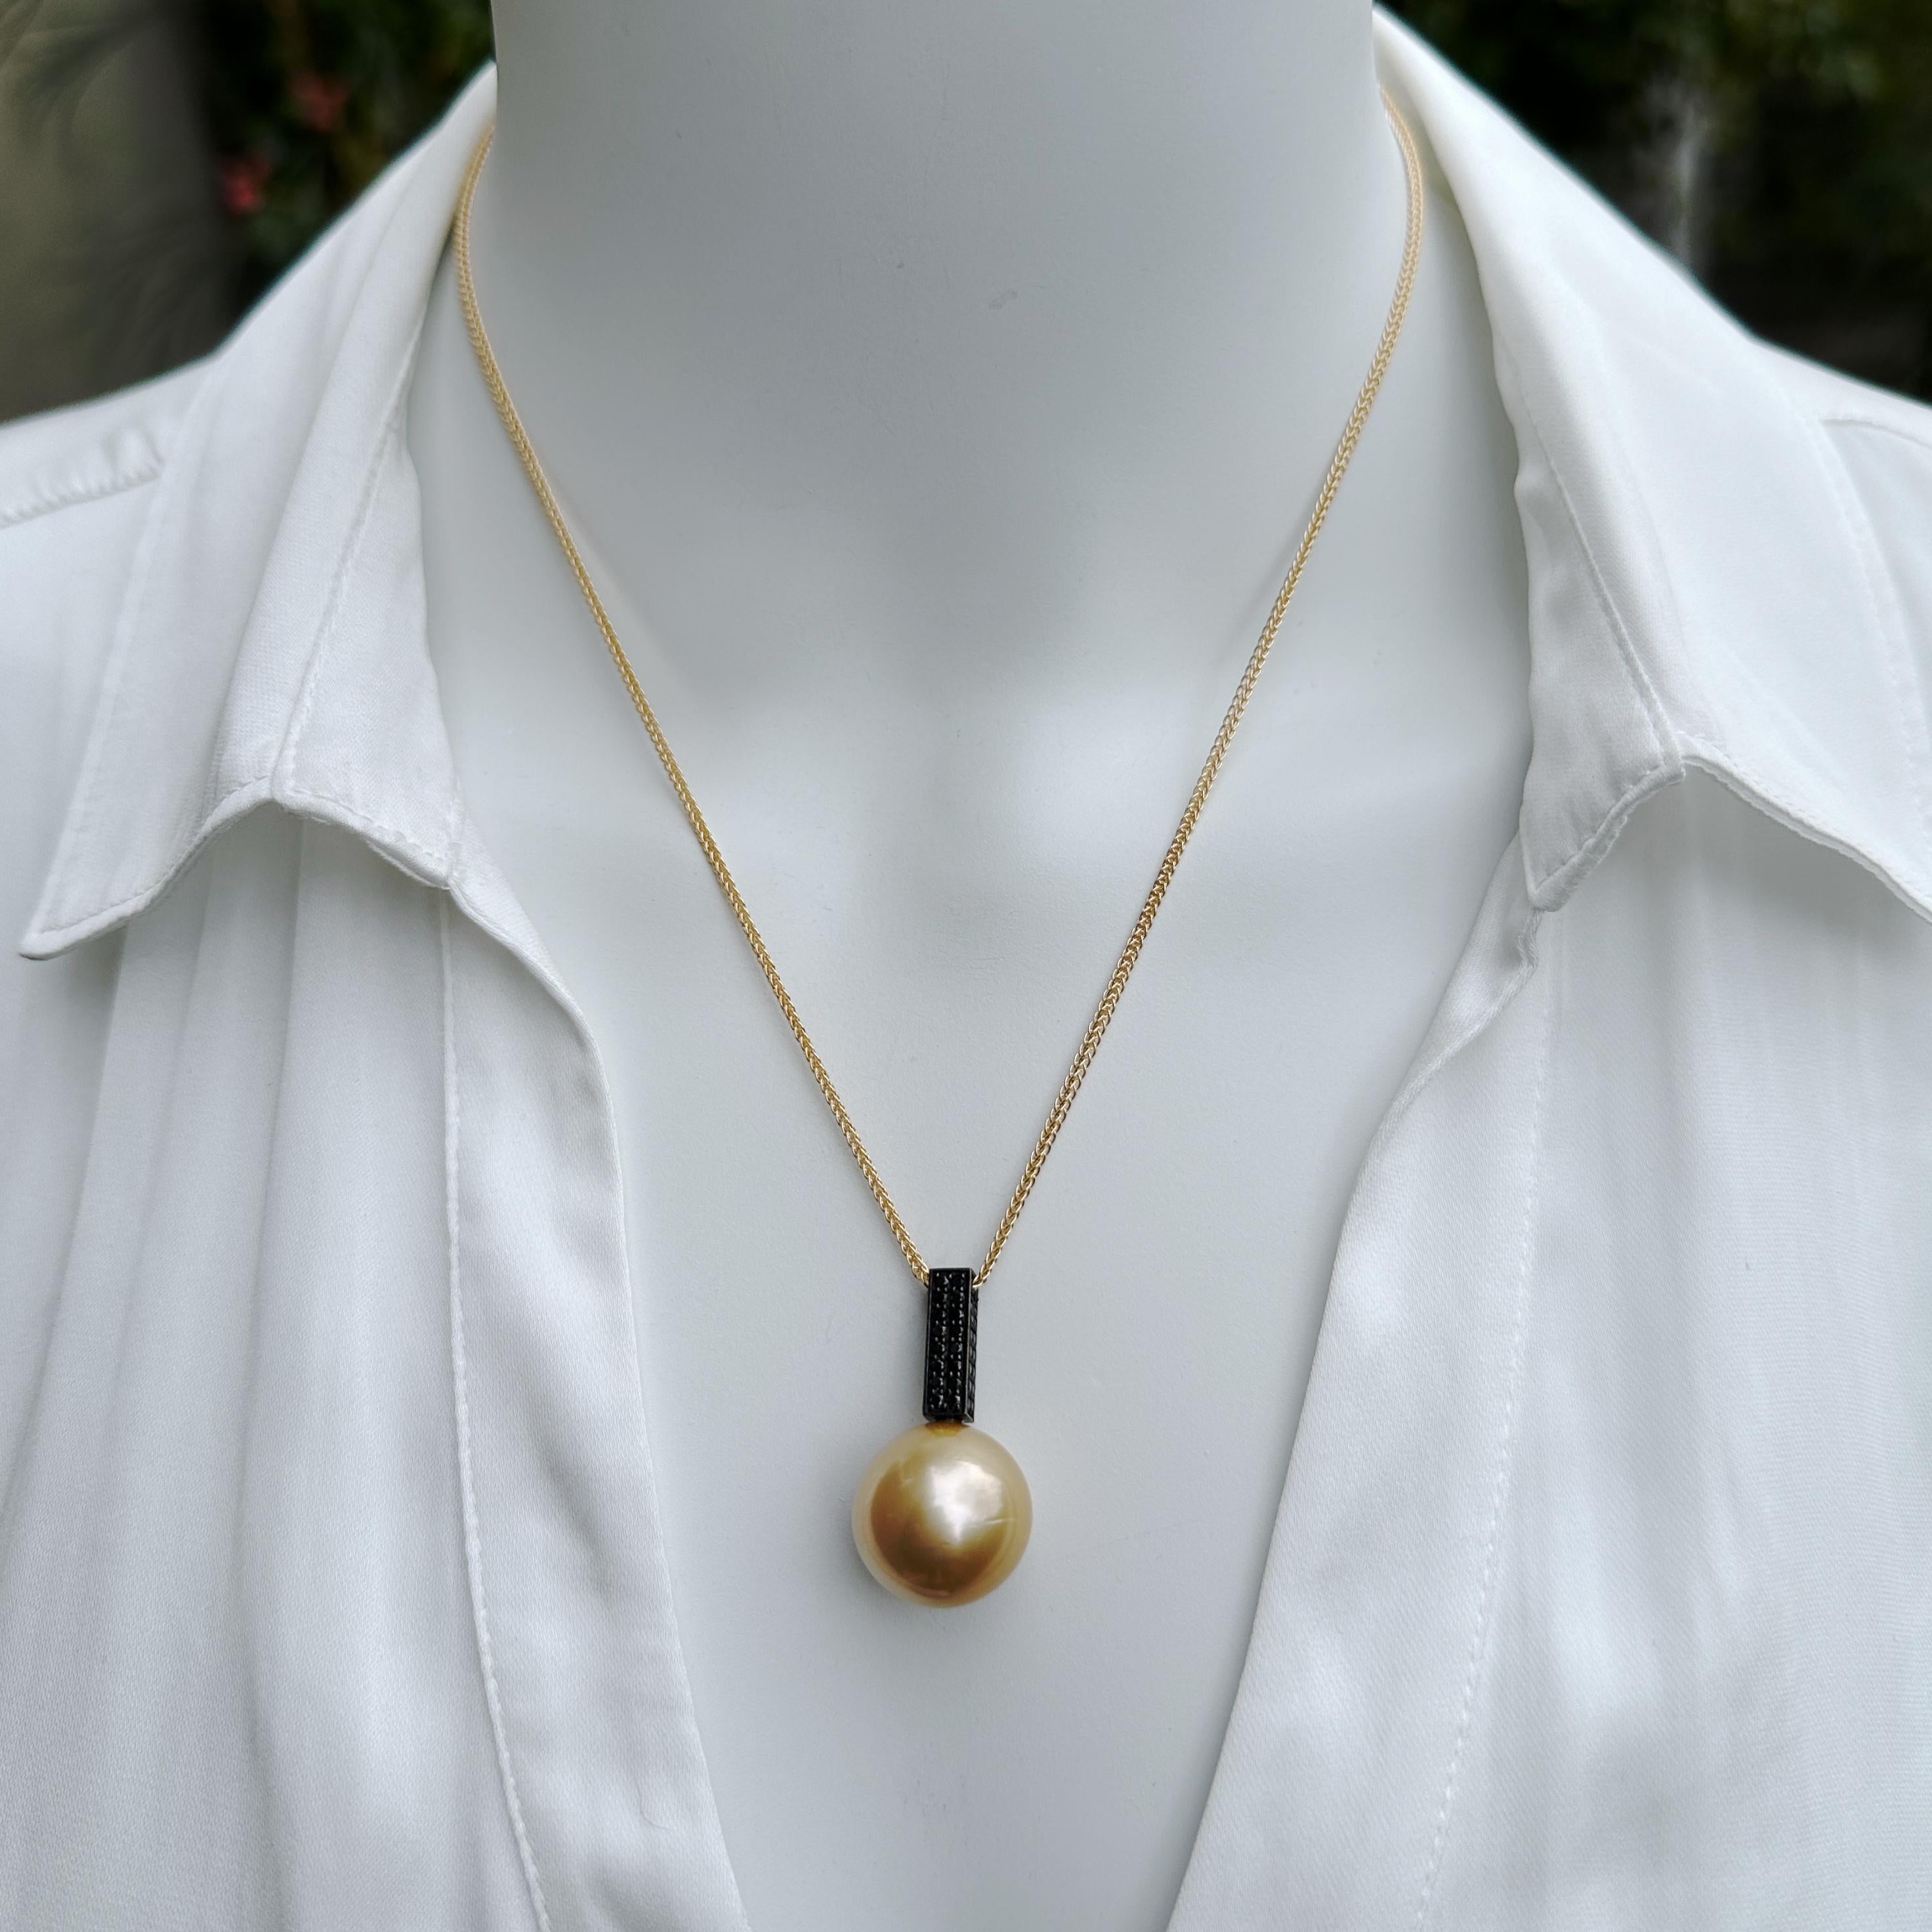 Combining a great new bale design by Eytan Brandes with a great big golden South Sea pearl, this knockout pendant is modern, unique (literally, there's only one), and immediately eye-catching.

The bale is a 14K white gold box that's been dipped in